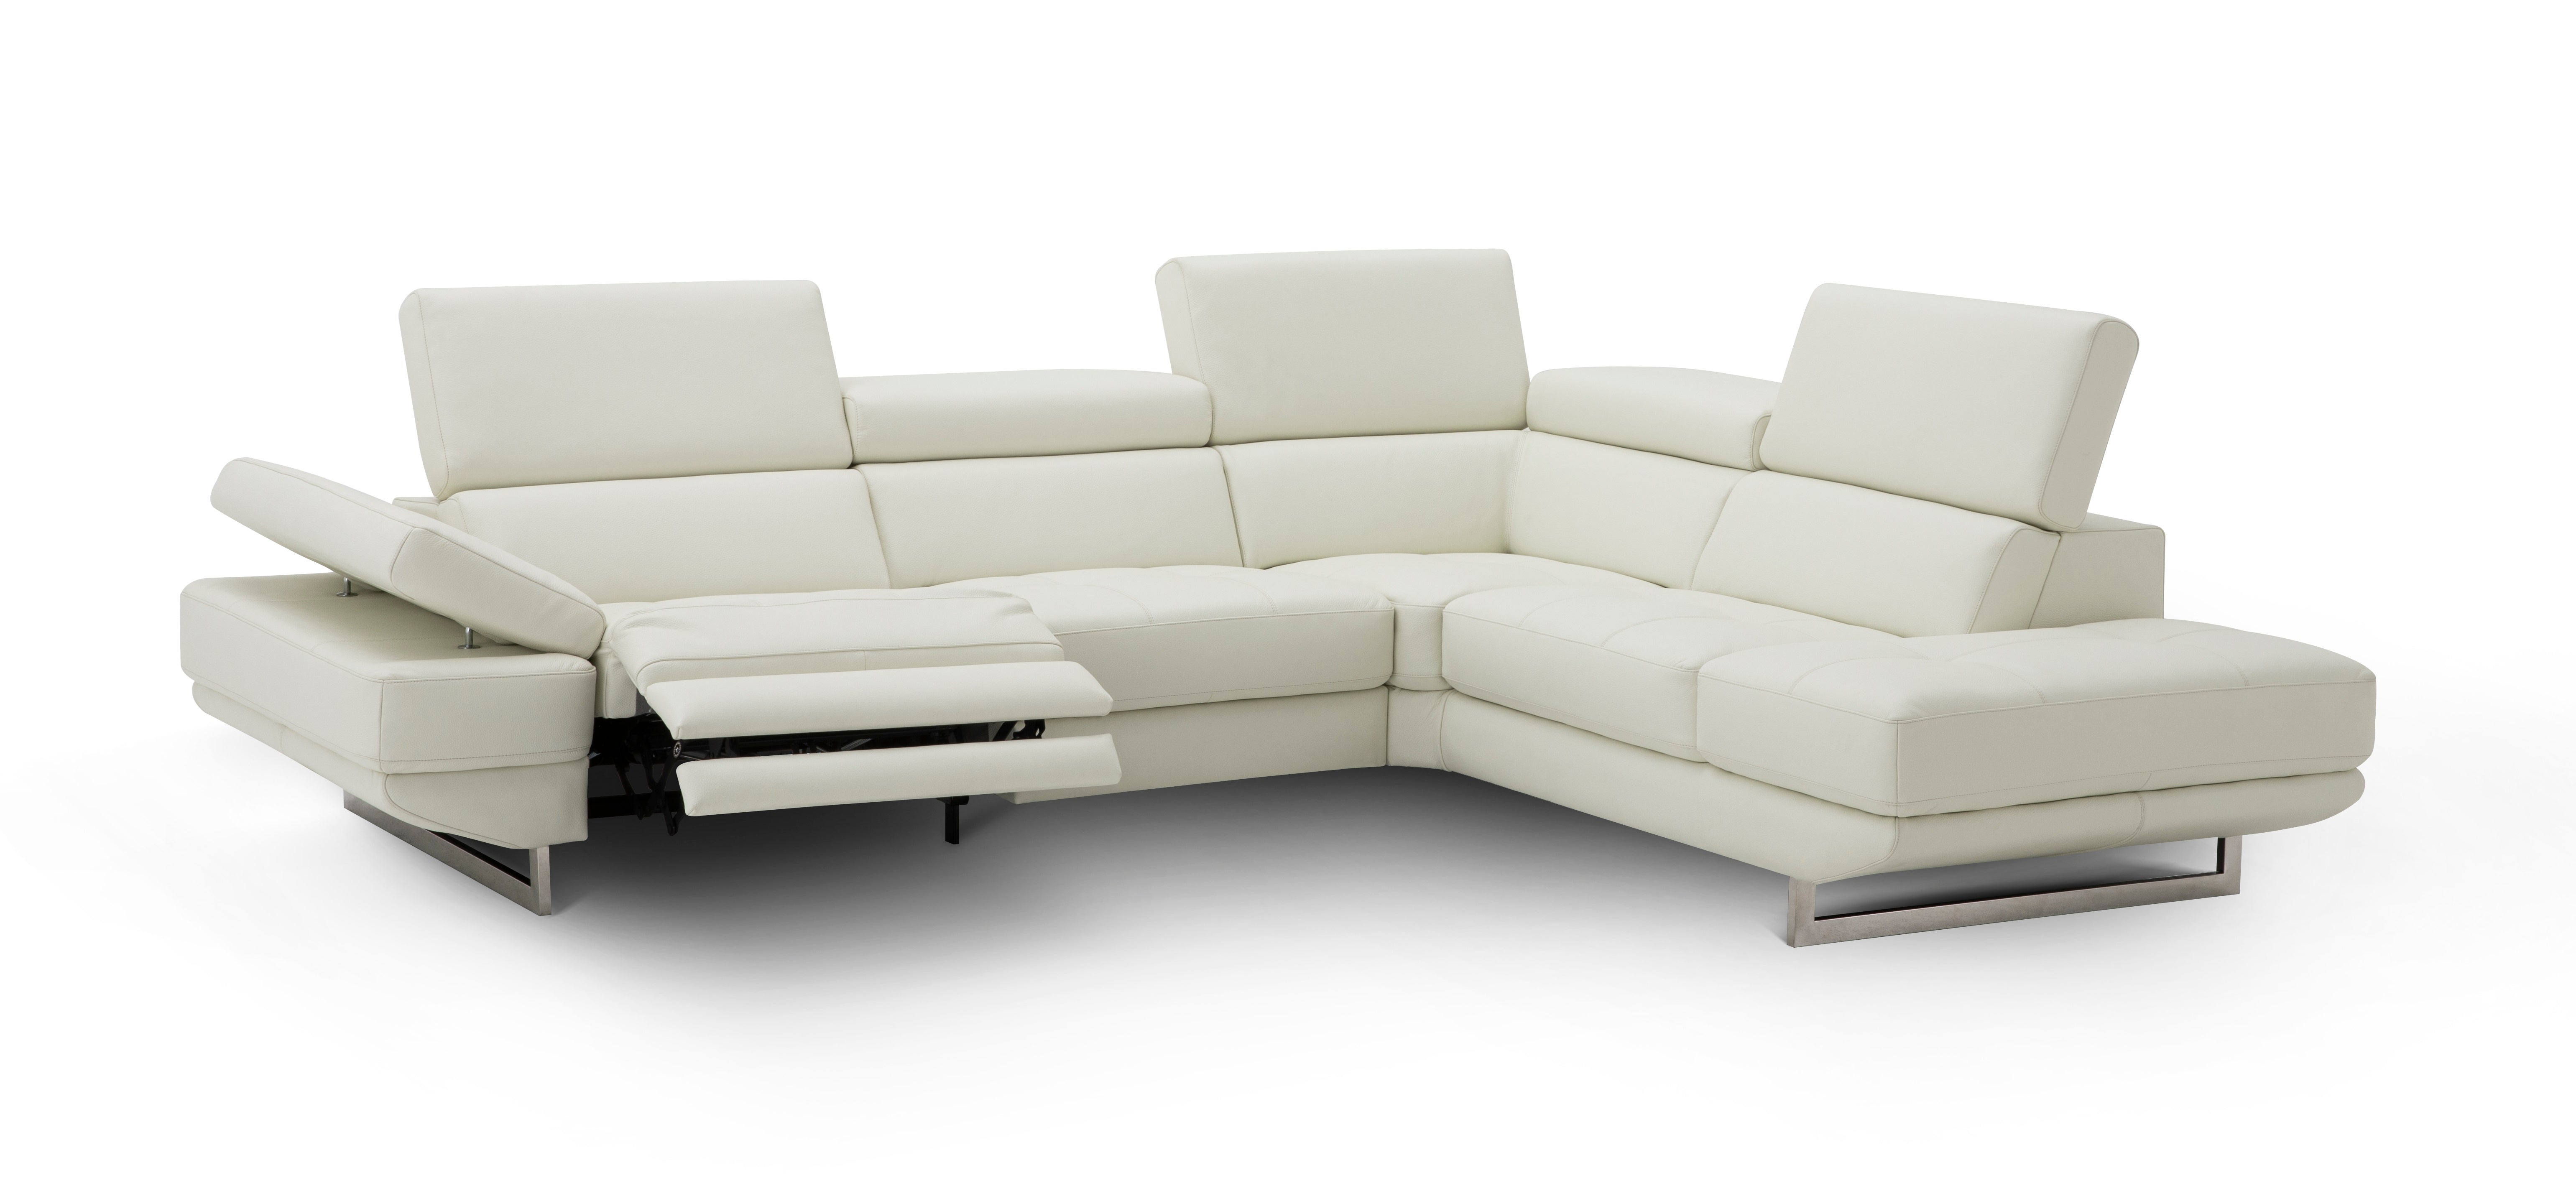 Annalaise Italian Leather Sectional in Snow White